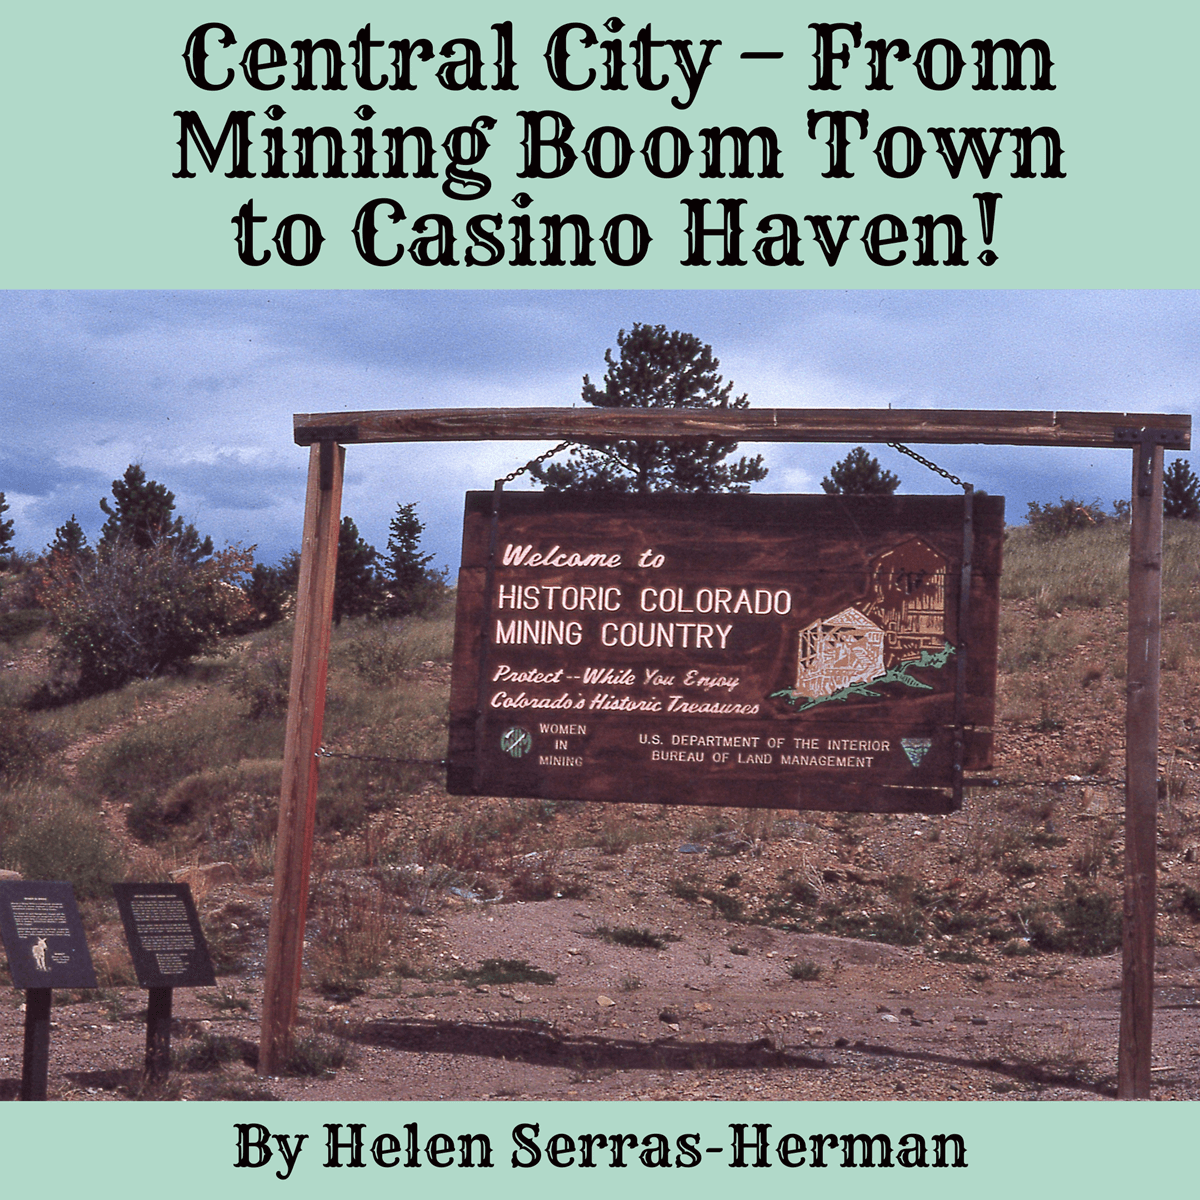 Central City - From Mining Boom Town to Casino Haven!